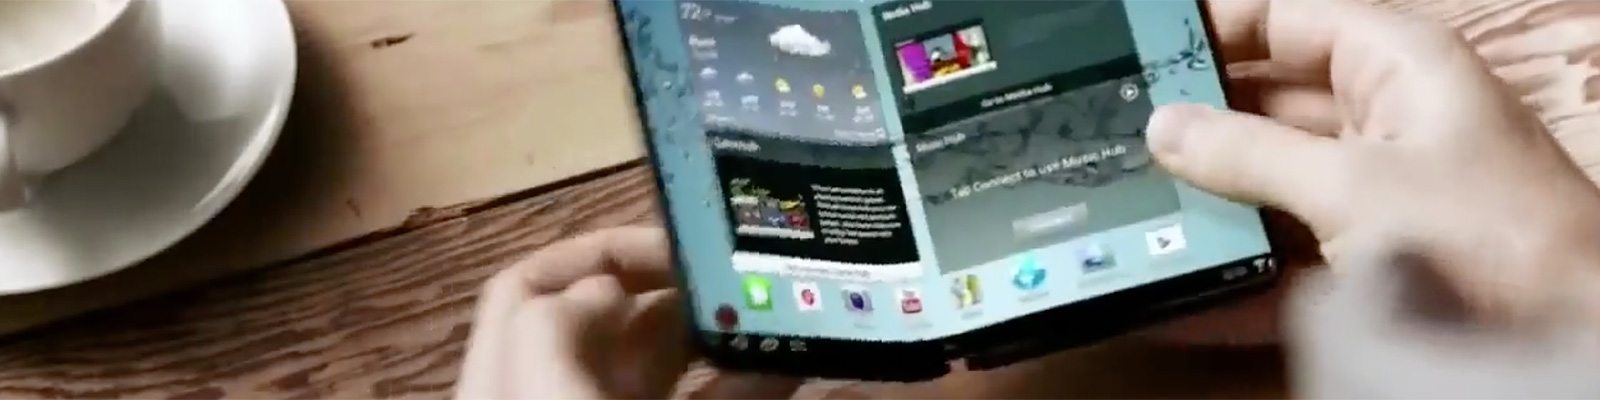 2014 Samsung Flexible OLED Display Phone and Tab Concept（IndVideos）